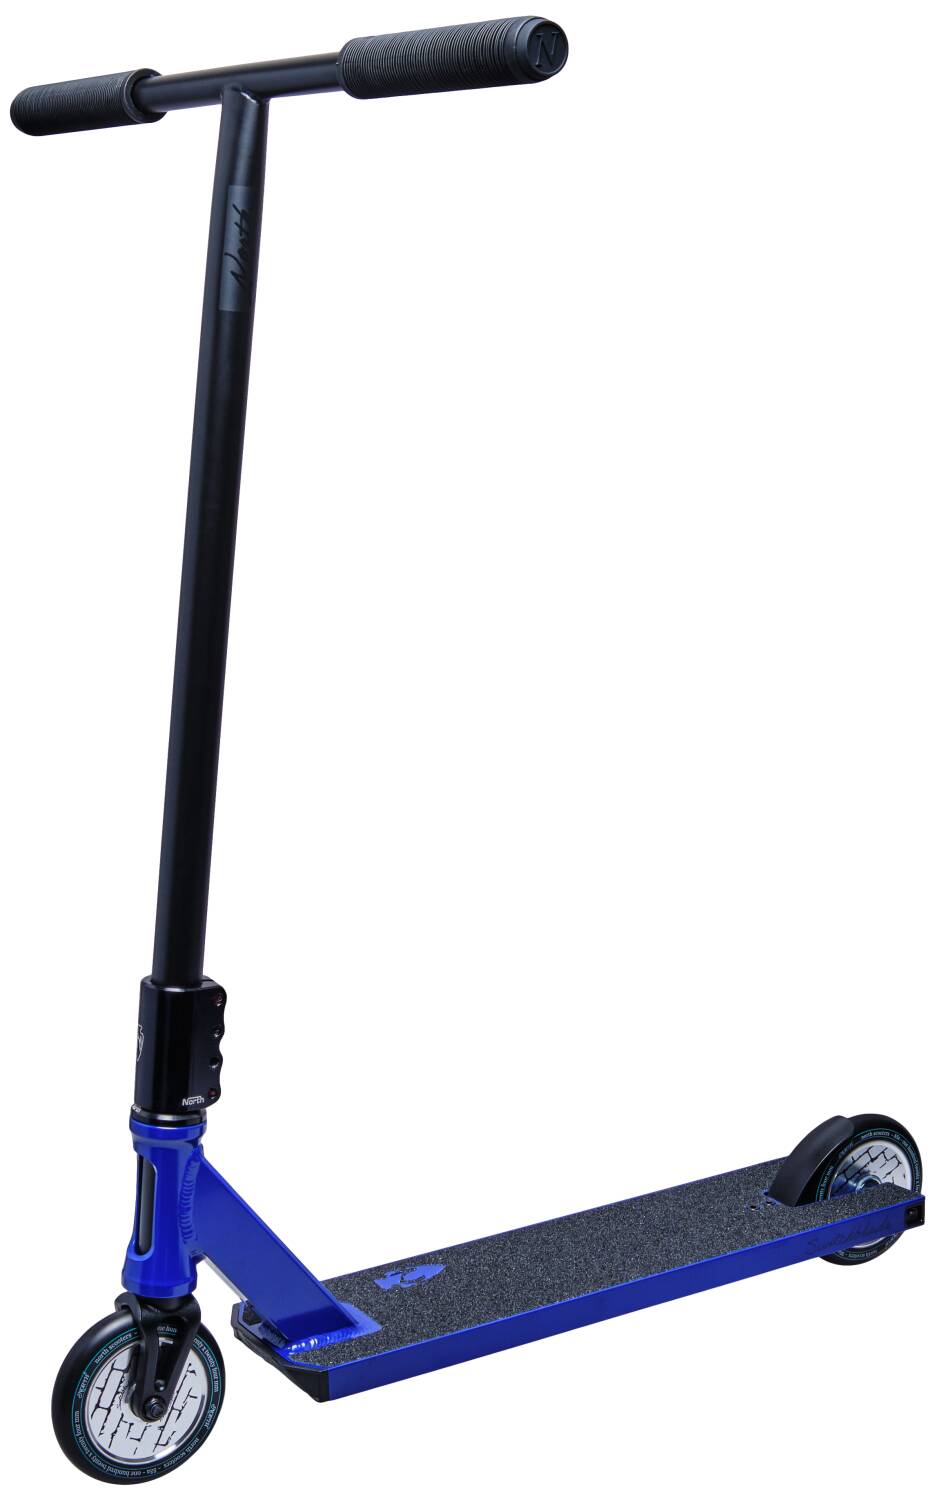 North Switchblade Pro Scooter - Blue